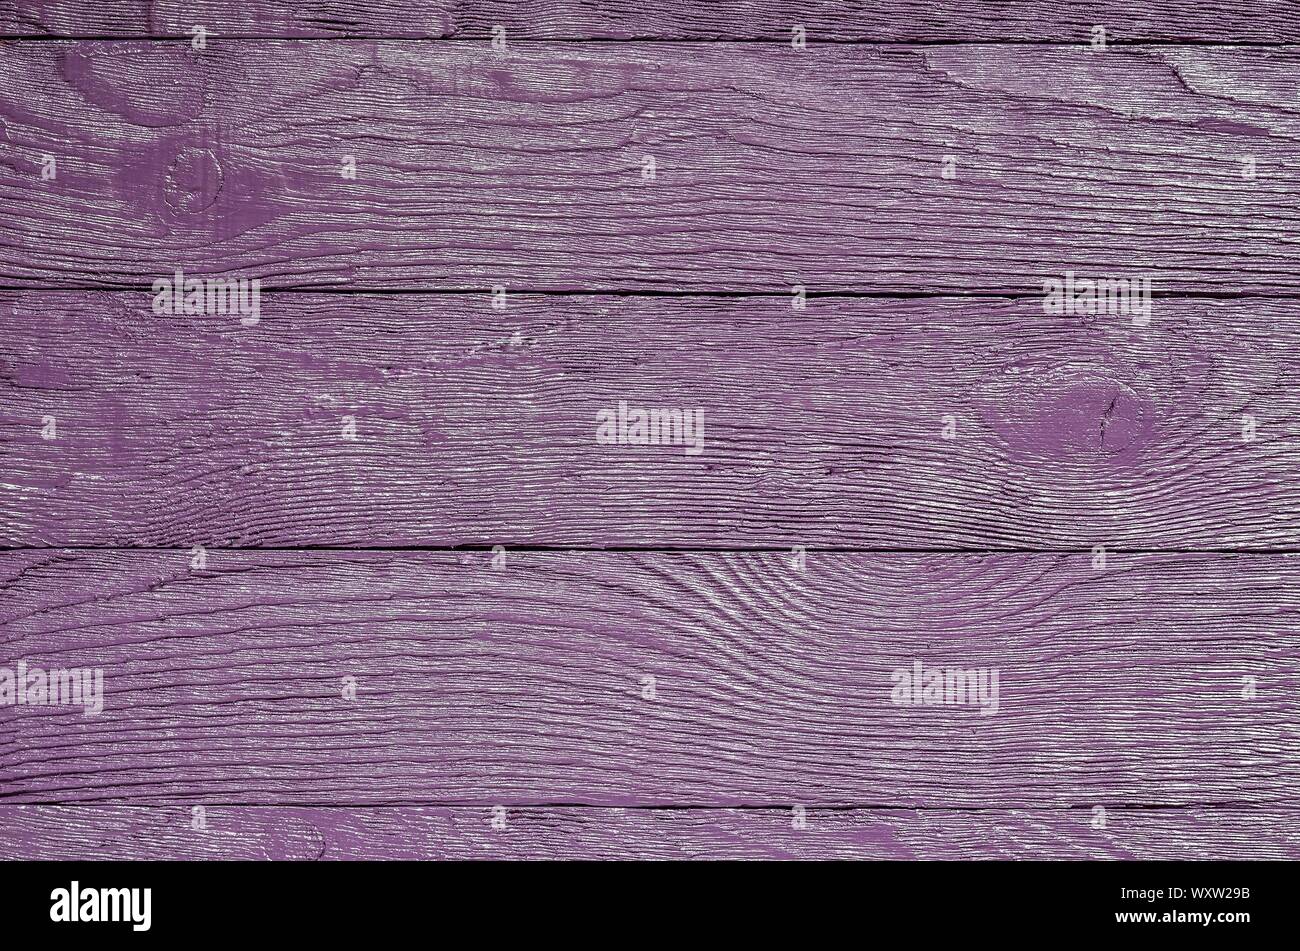 Wooden background texture. Creatively painted intense violet boards. Stock Photo